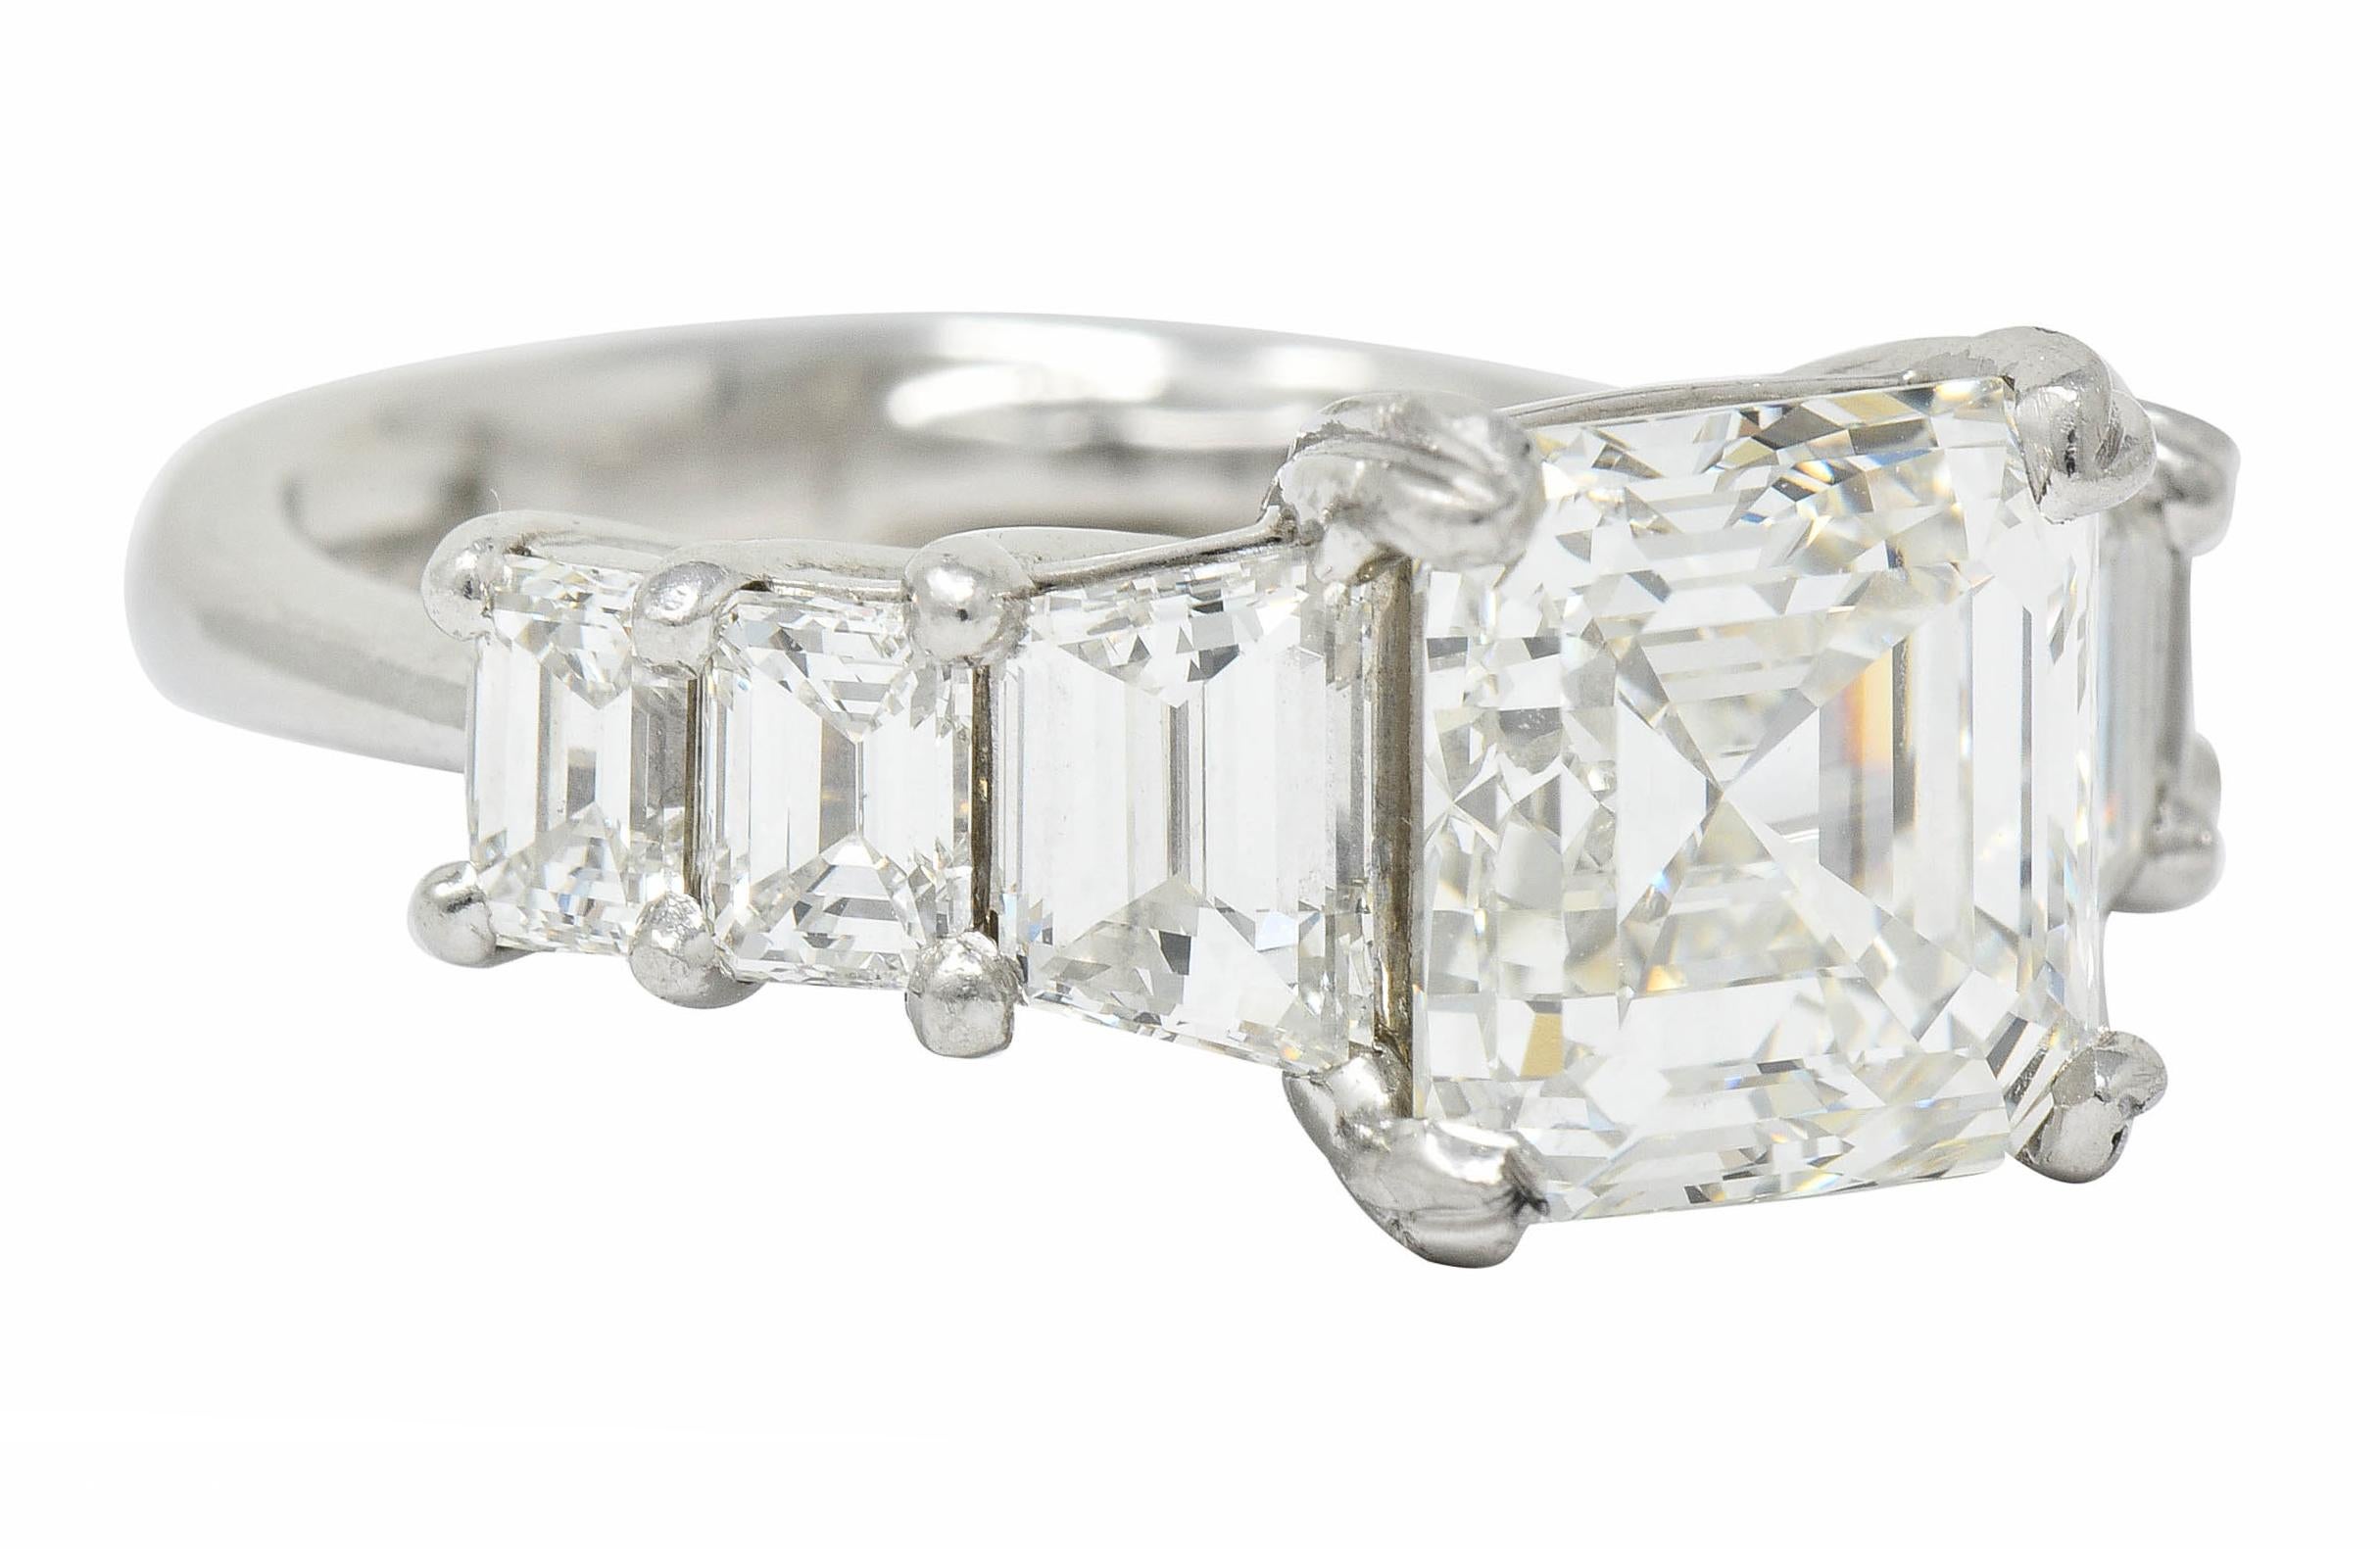 Incredible stepped mounting with a dramatically trellised gallery, basket set center, and deeply grooved decorative prongs

Featuring an asscher cut diamond weighing 3.50 carats with I color and VVS2 clarity

Flanked by trapezoid cut and baguette